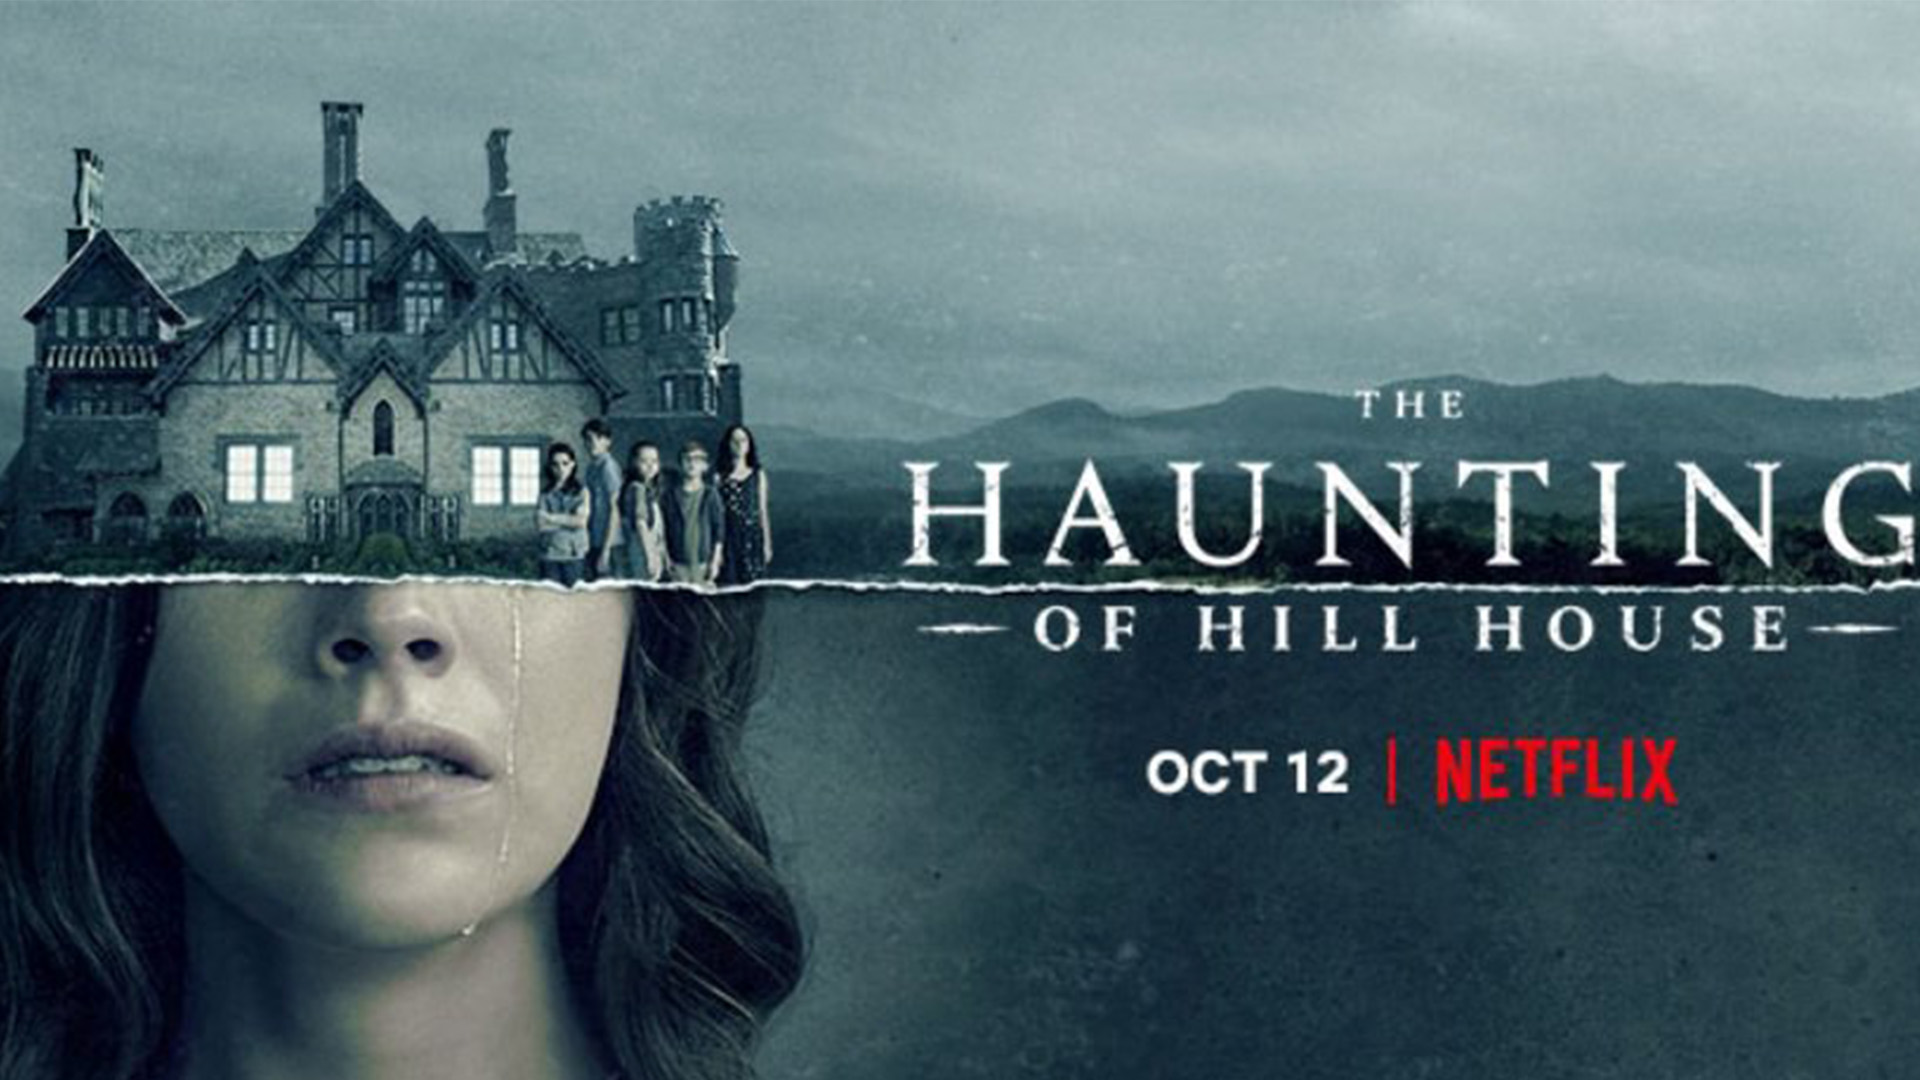 The Haunting of Hill House Filming Location Was A Real Haunted